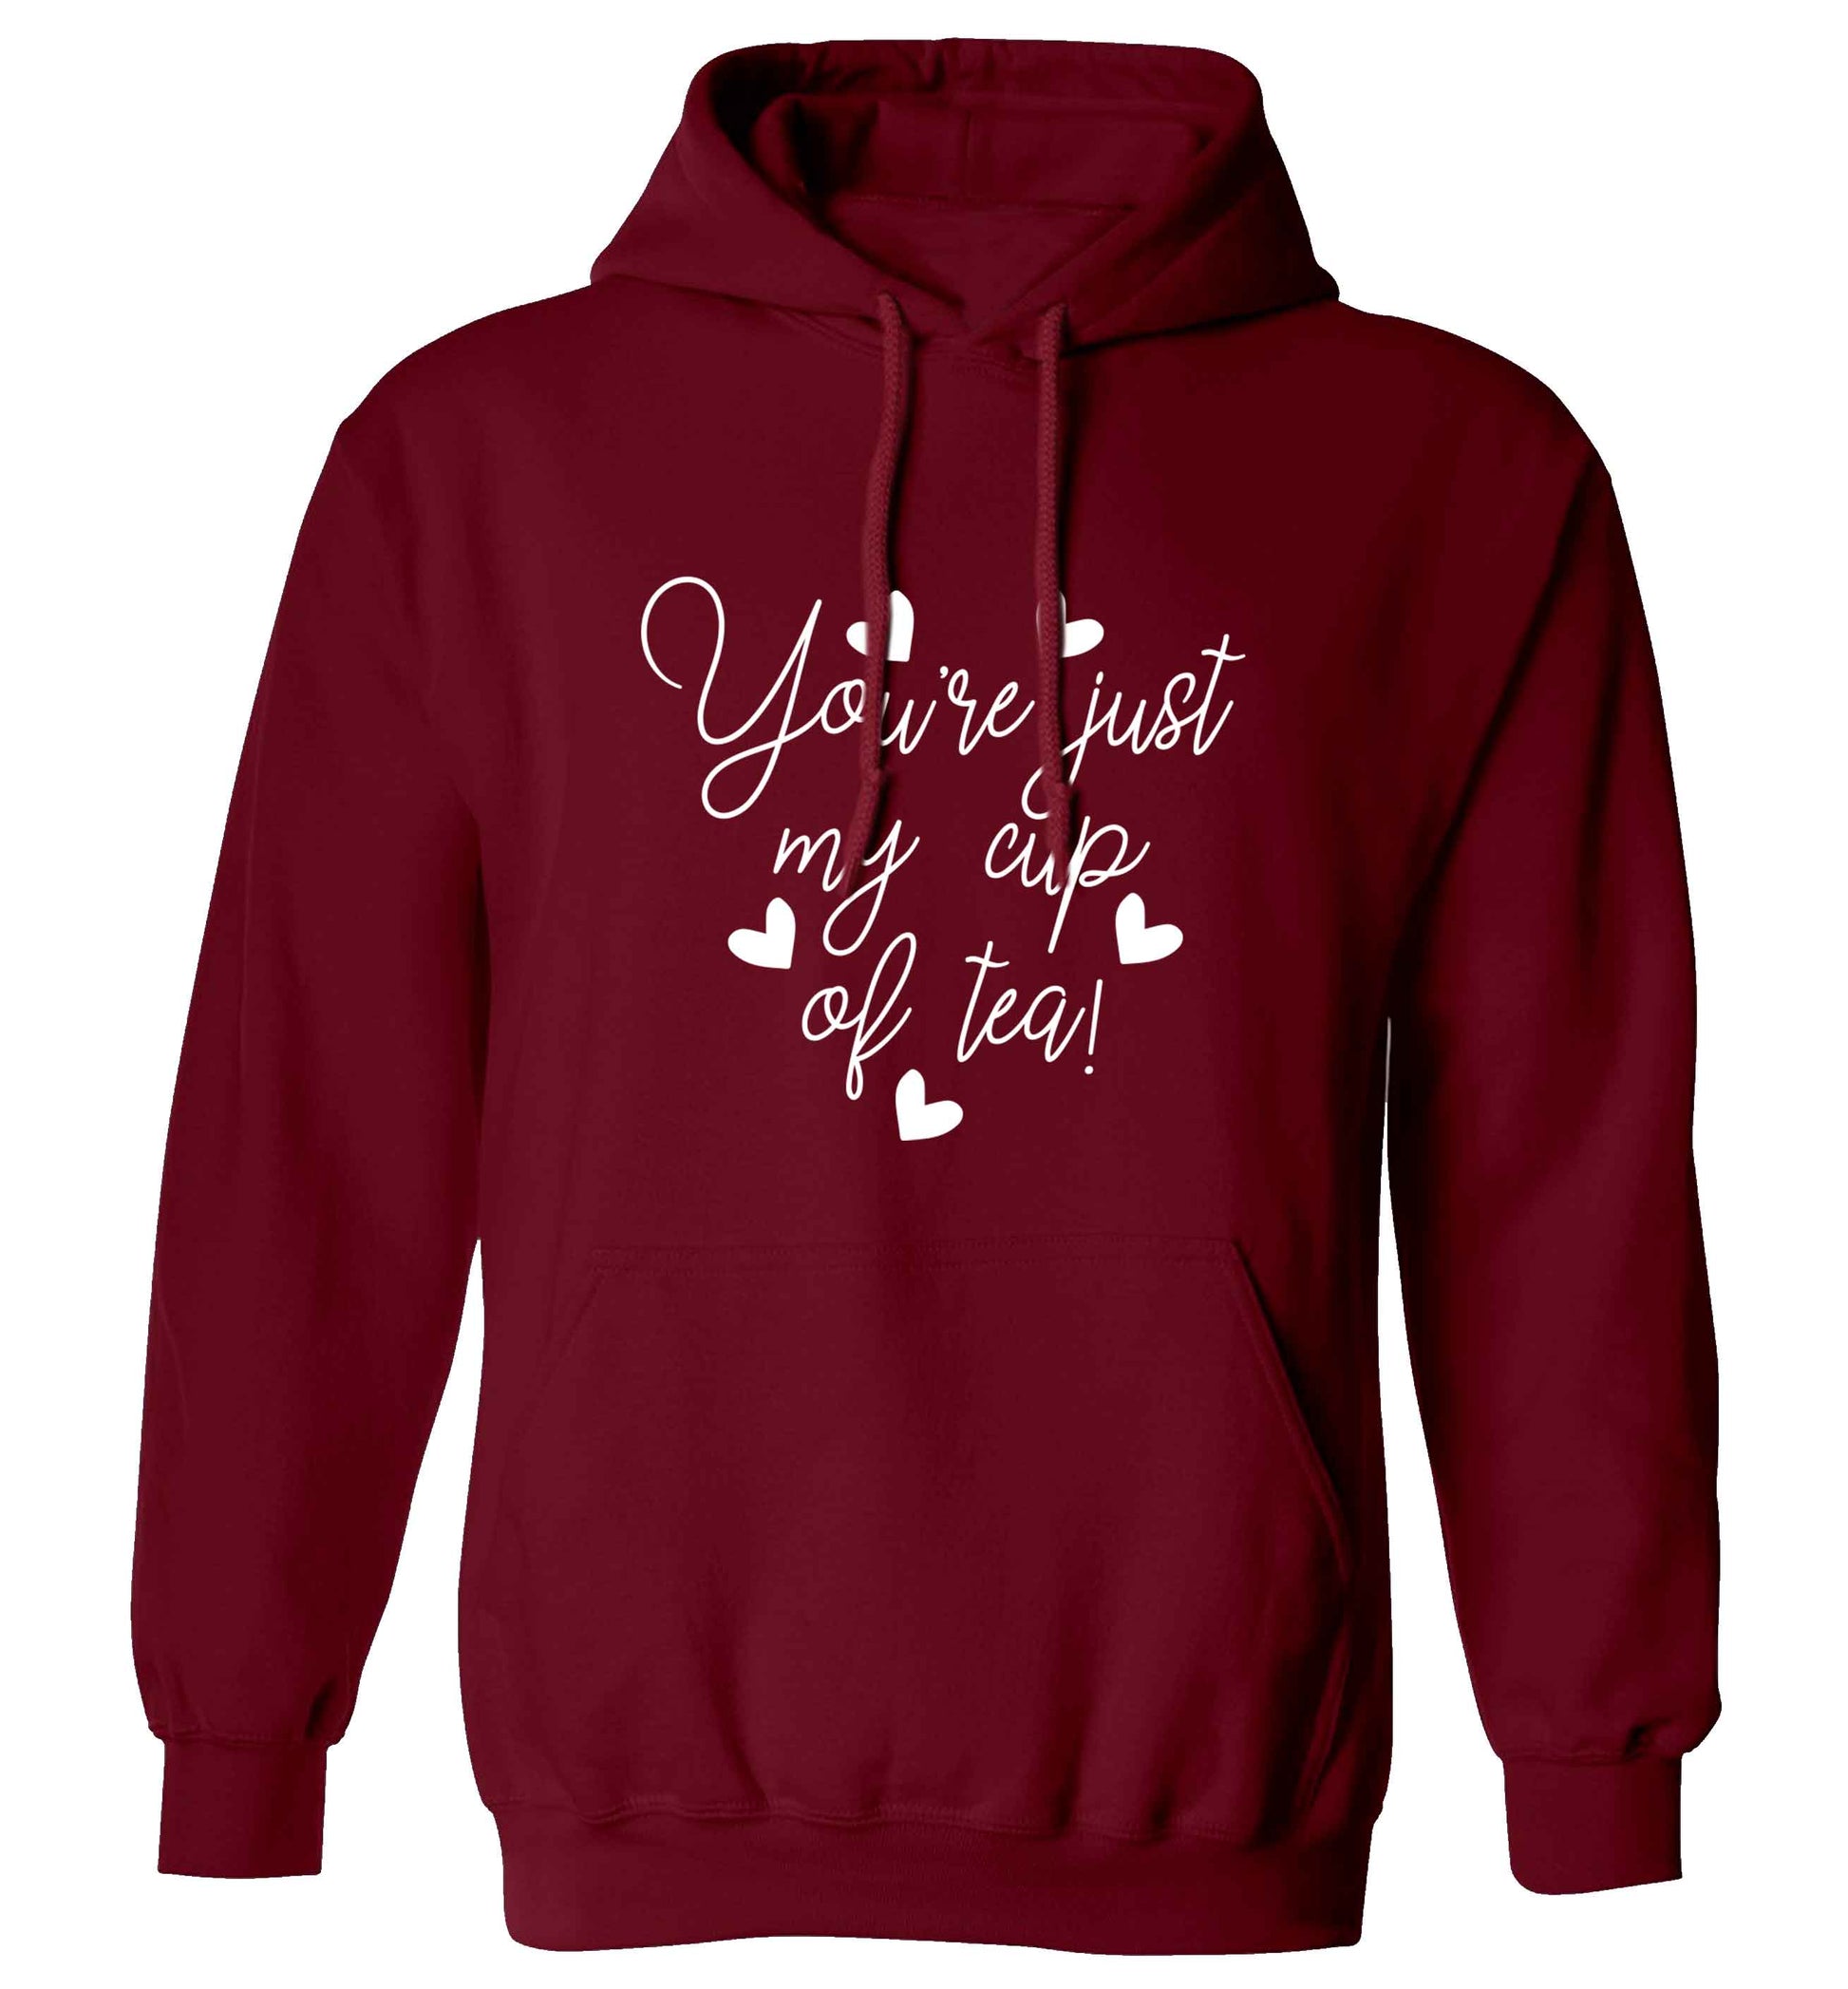 You're just my cup of tea adults unisex maroon hoodie 2XL